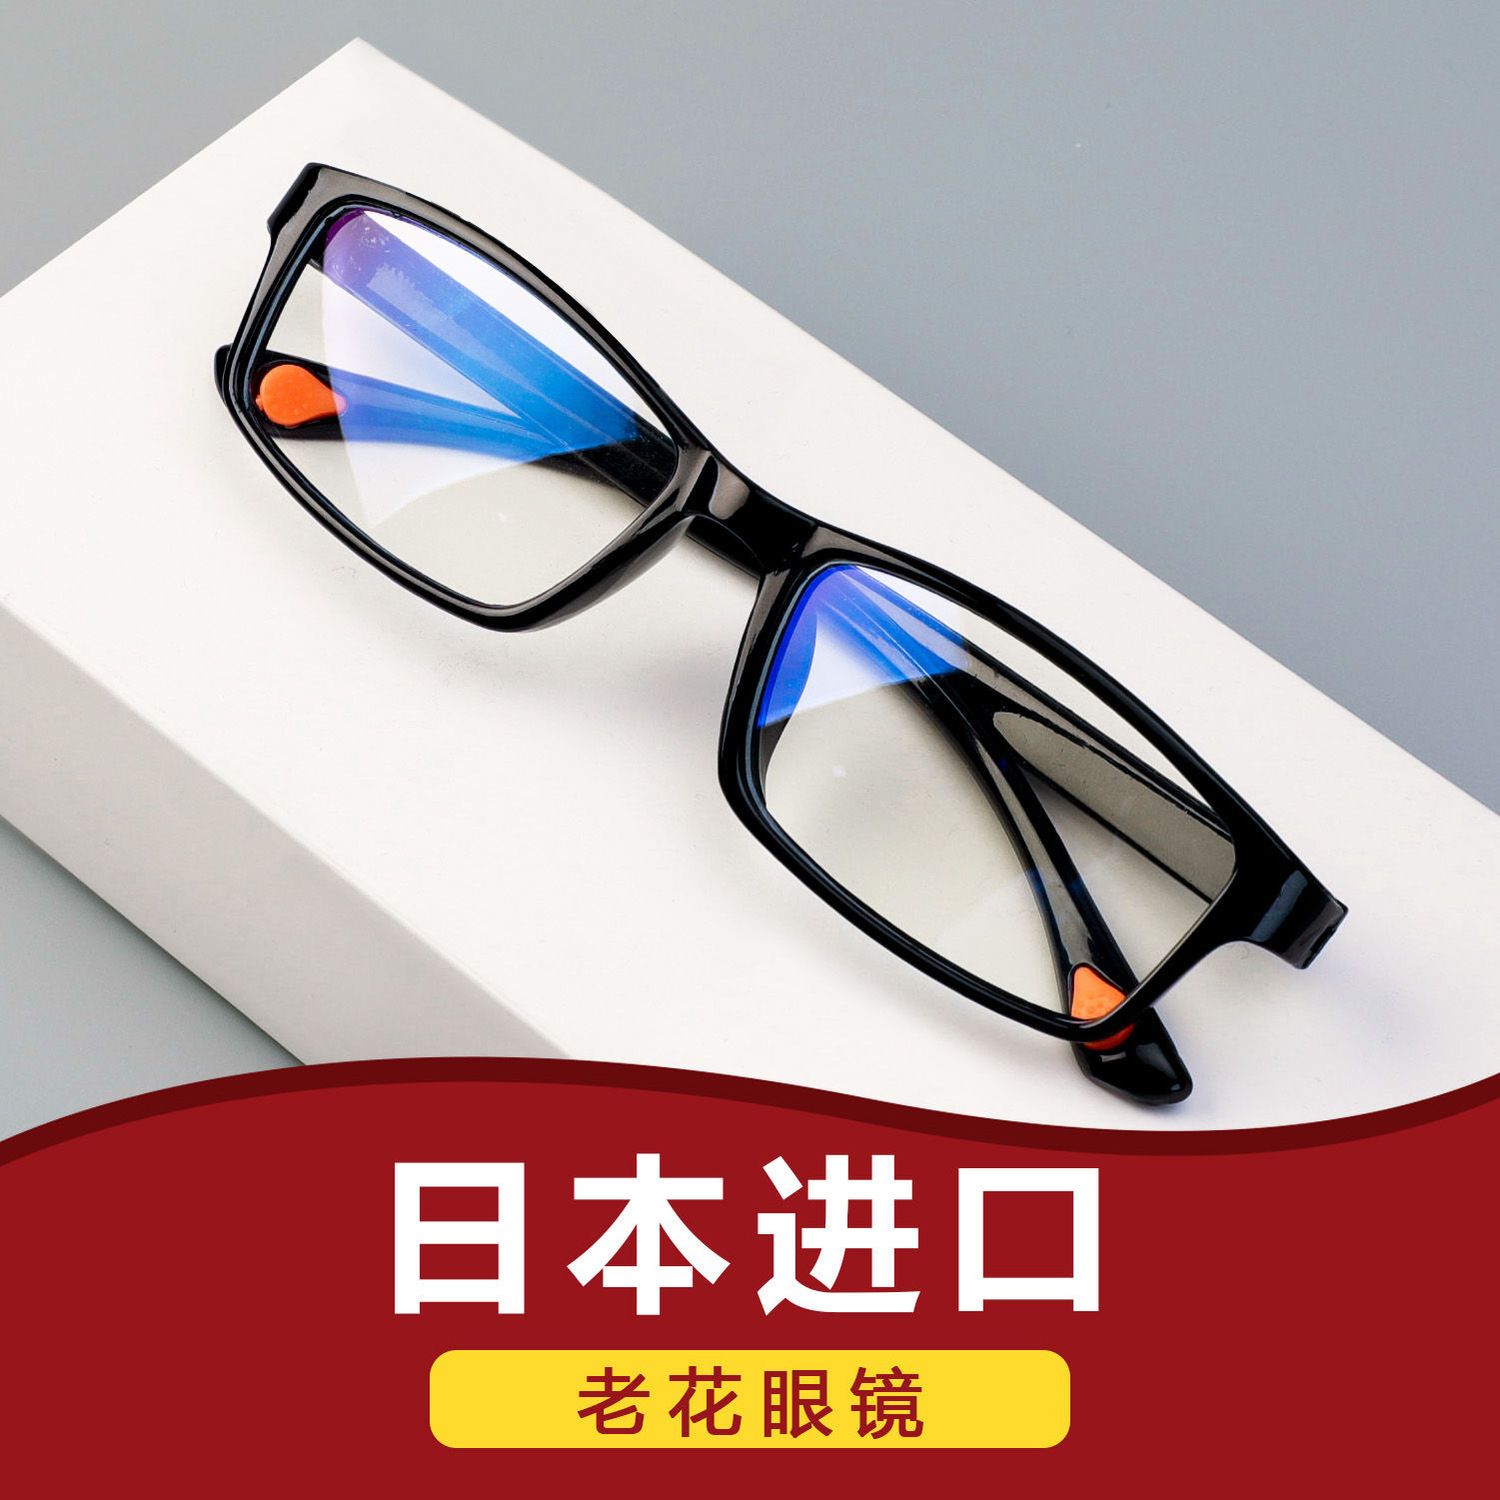 Anti blue TR90 presbyopic glasses protect eyes presbyopic glasses ultra light anti fatigue presbyopic glasses for men and women